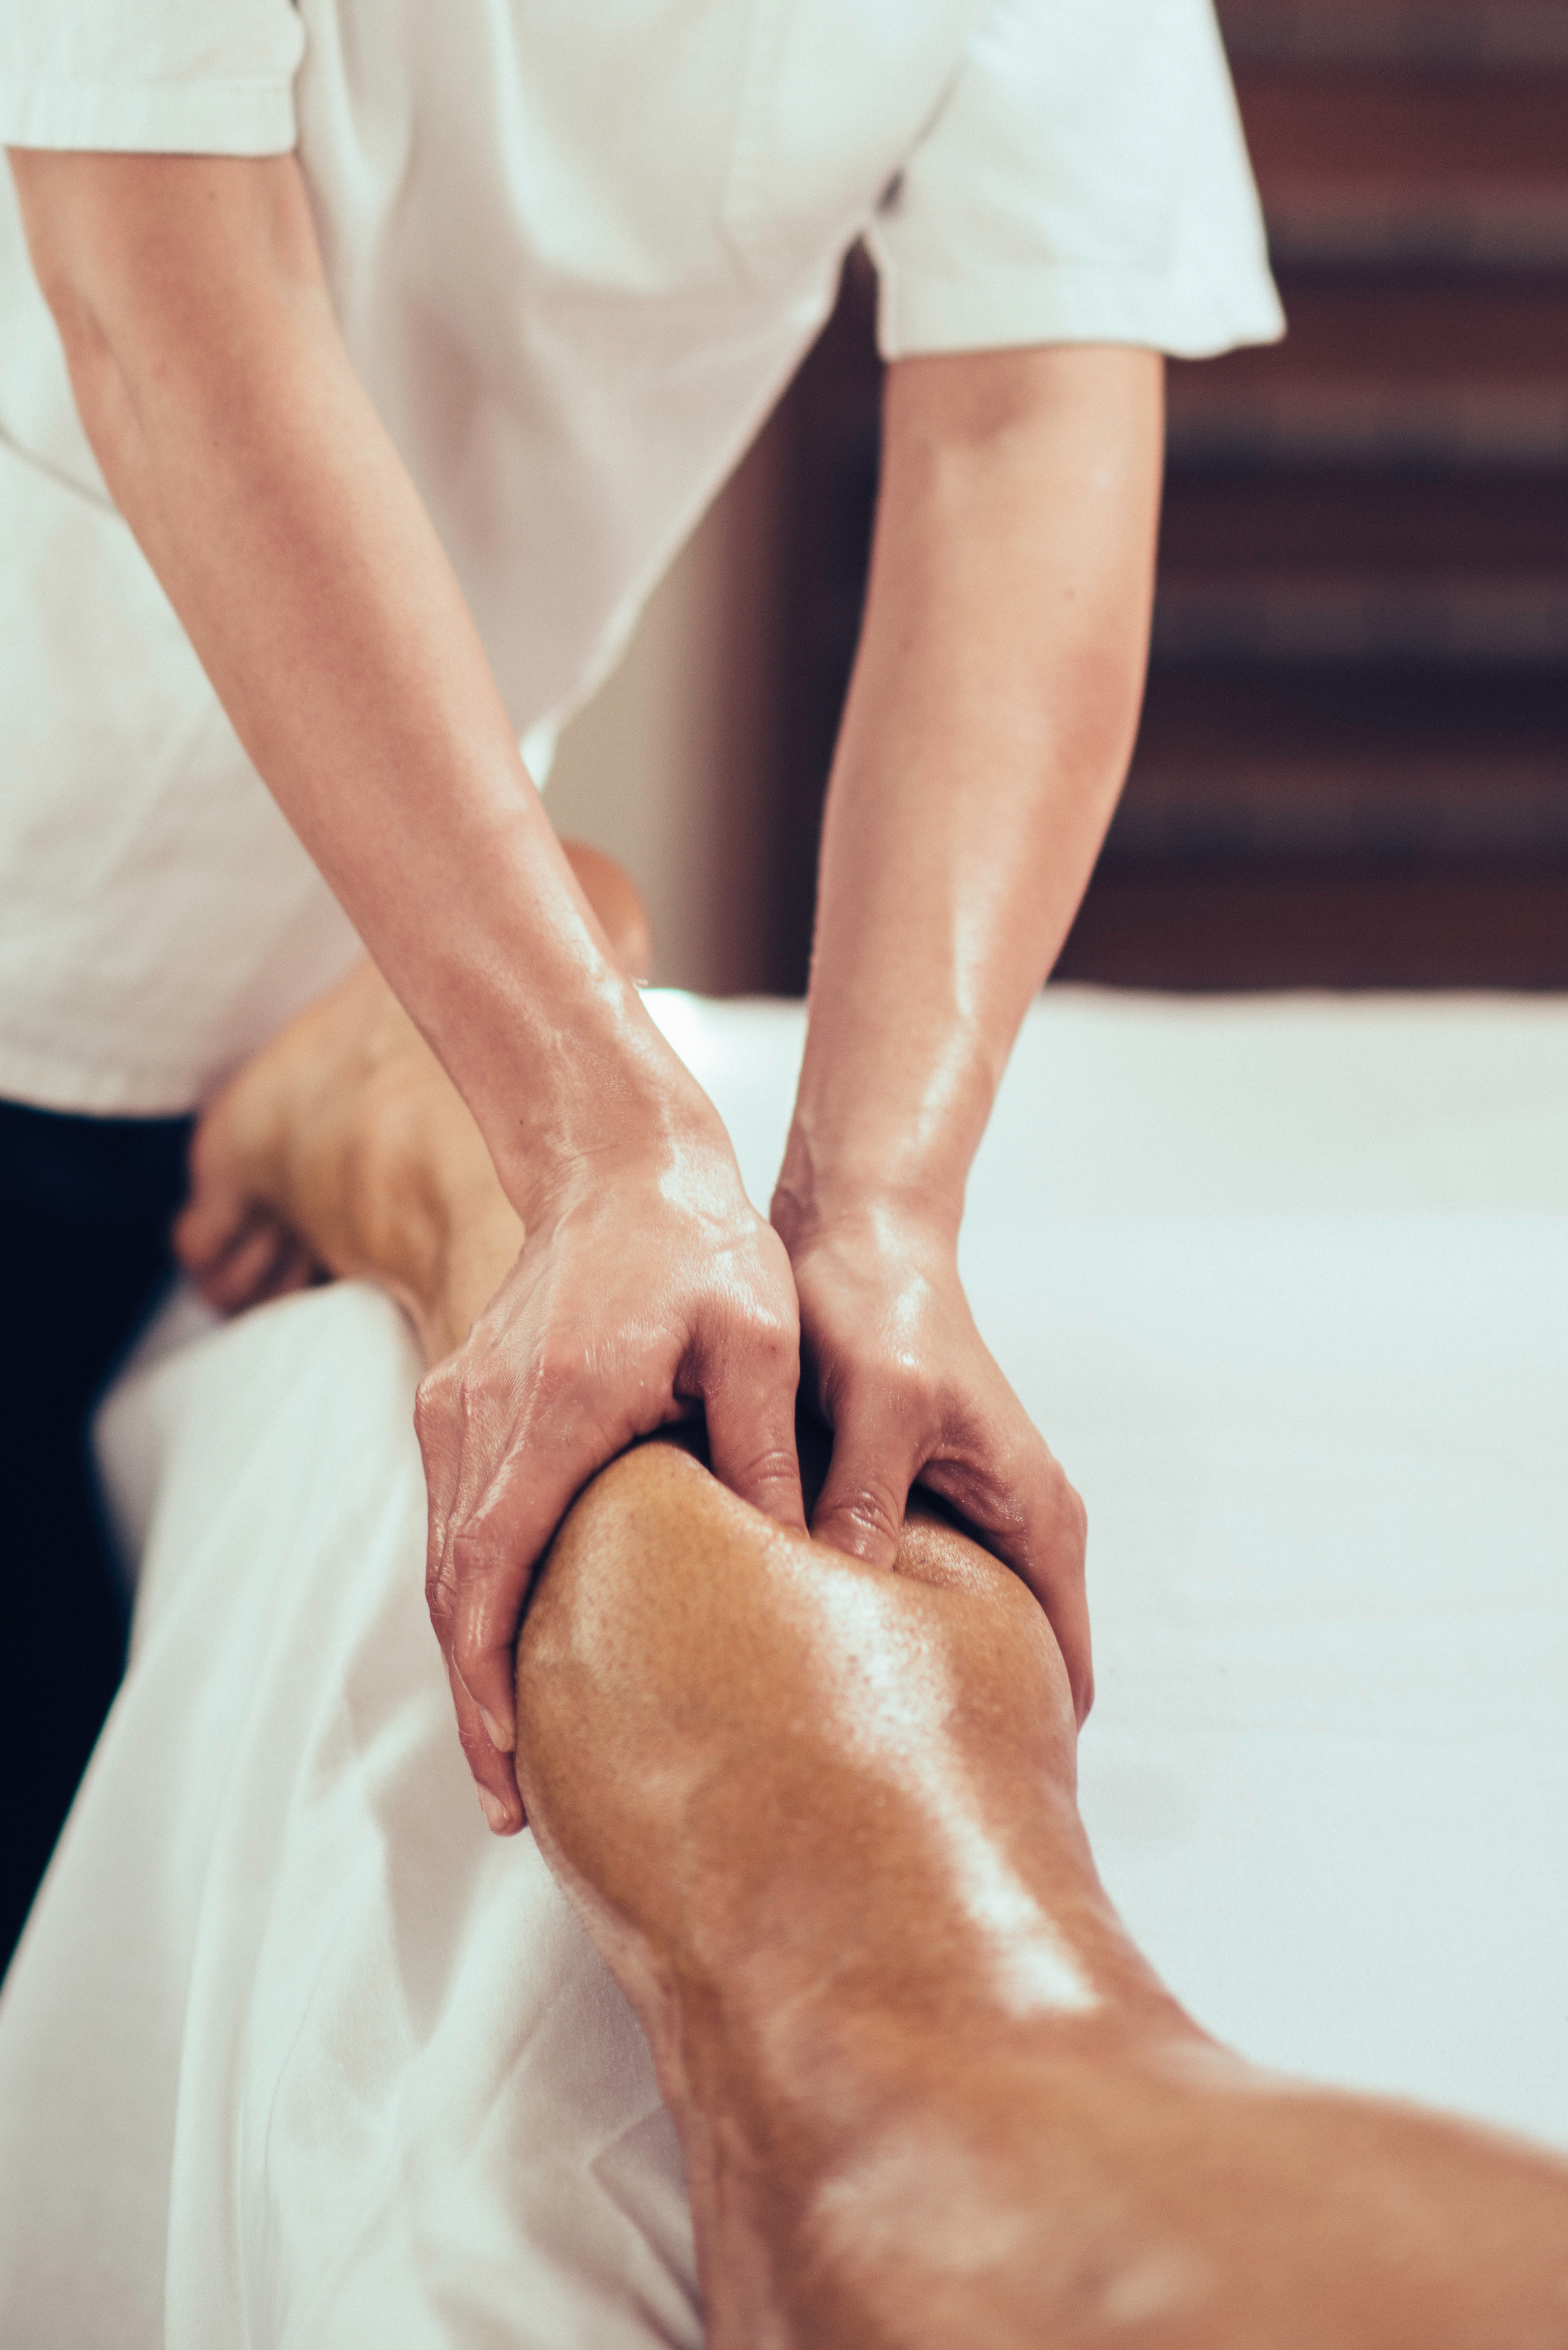 Sports Massage - Prevent Injury and Maintain a Healthy Body and Mind